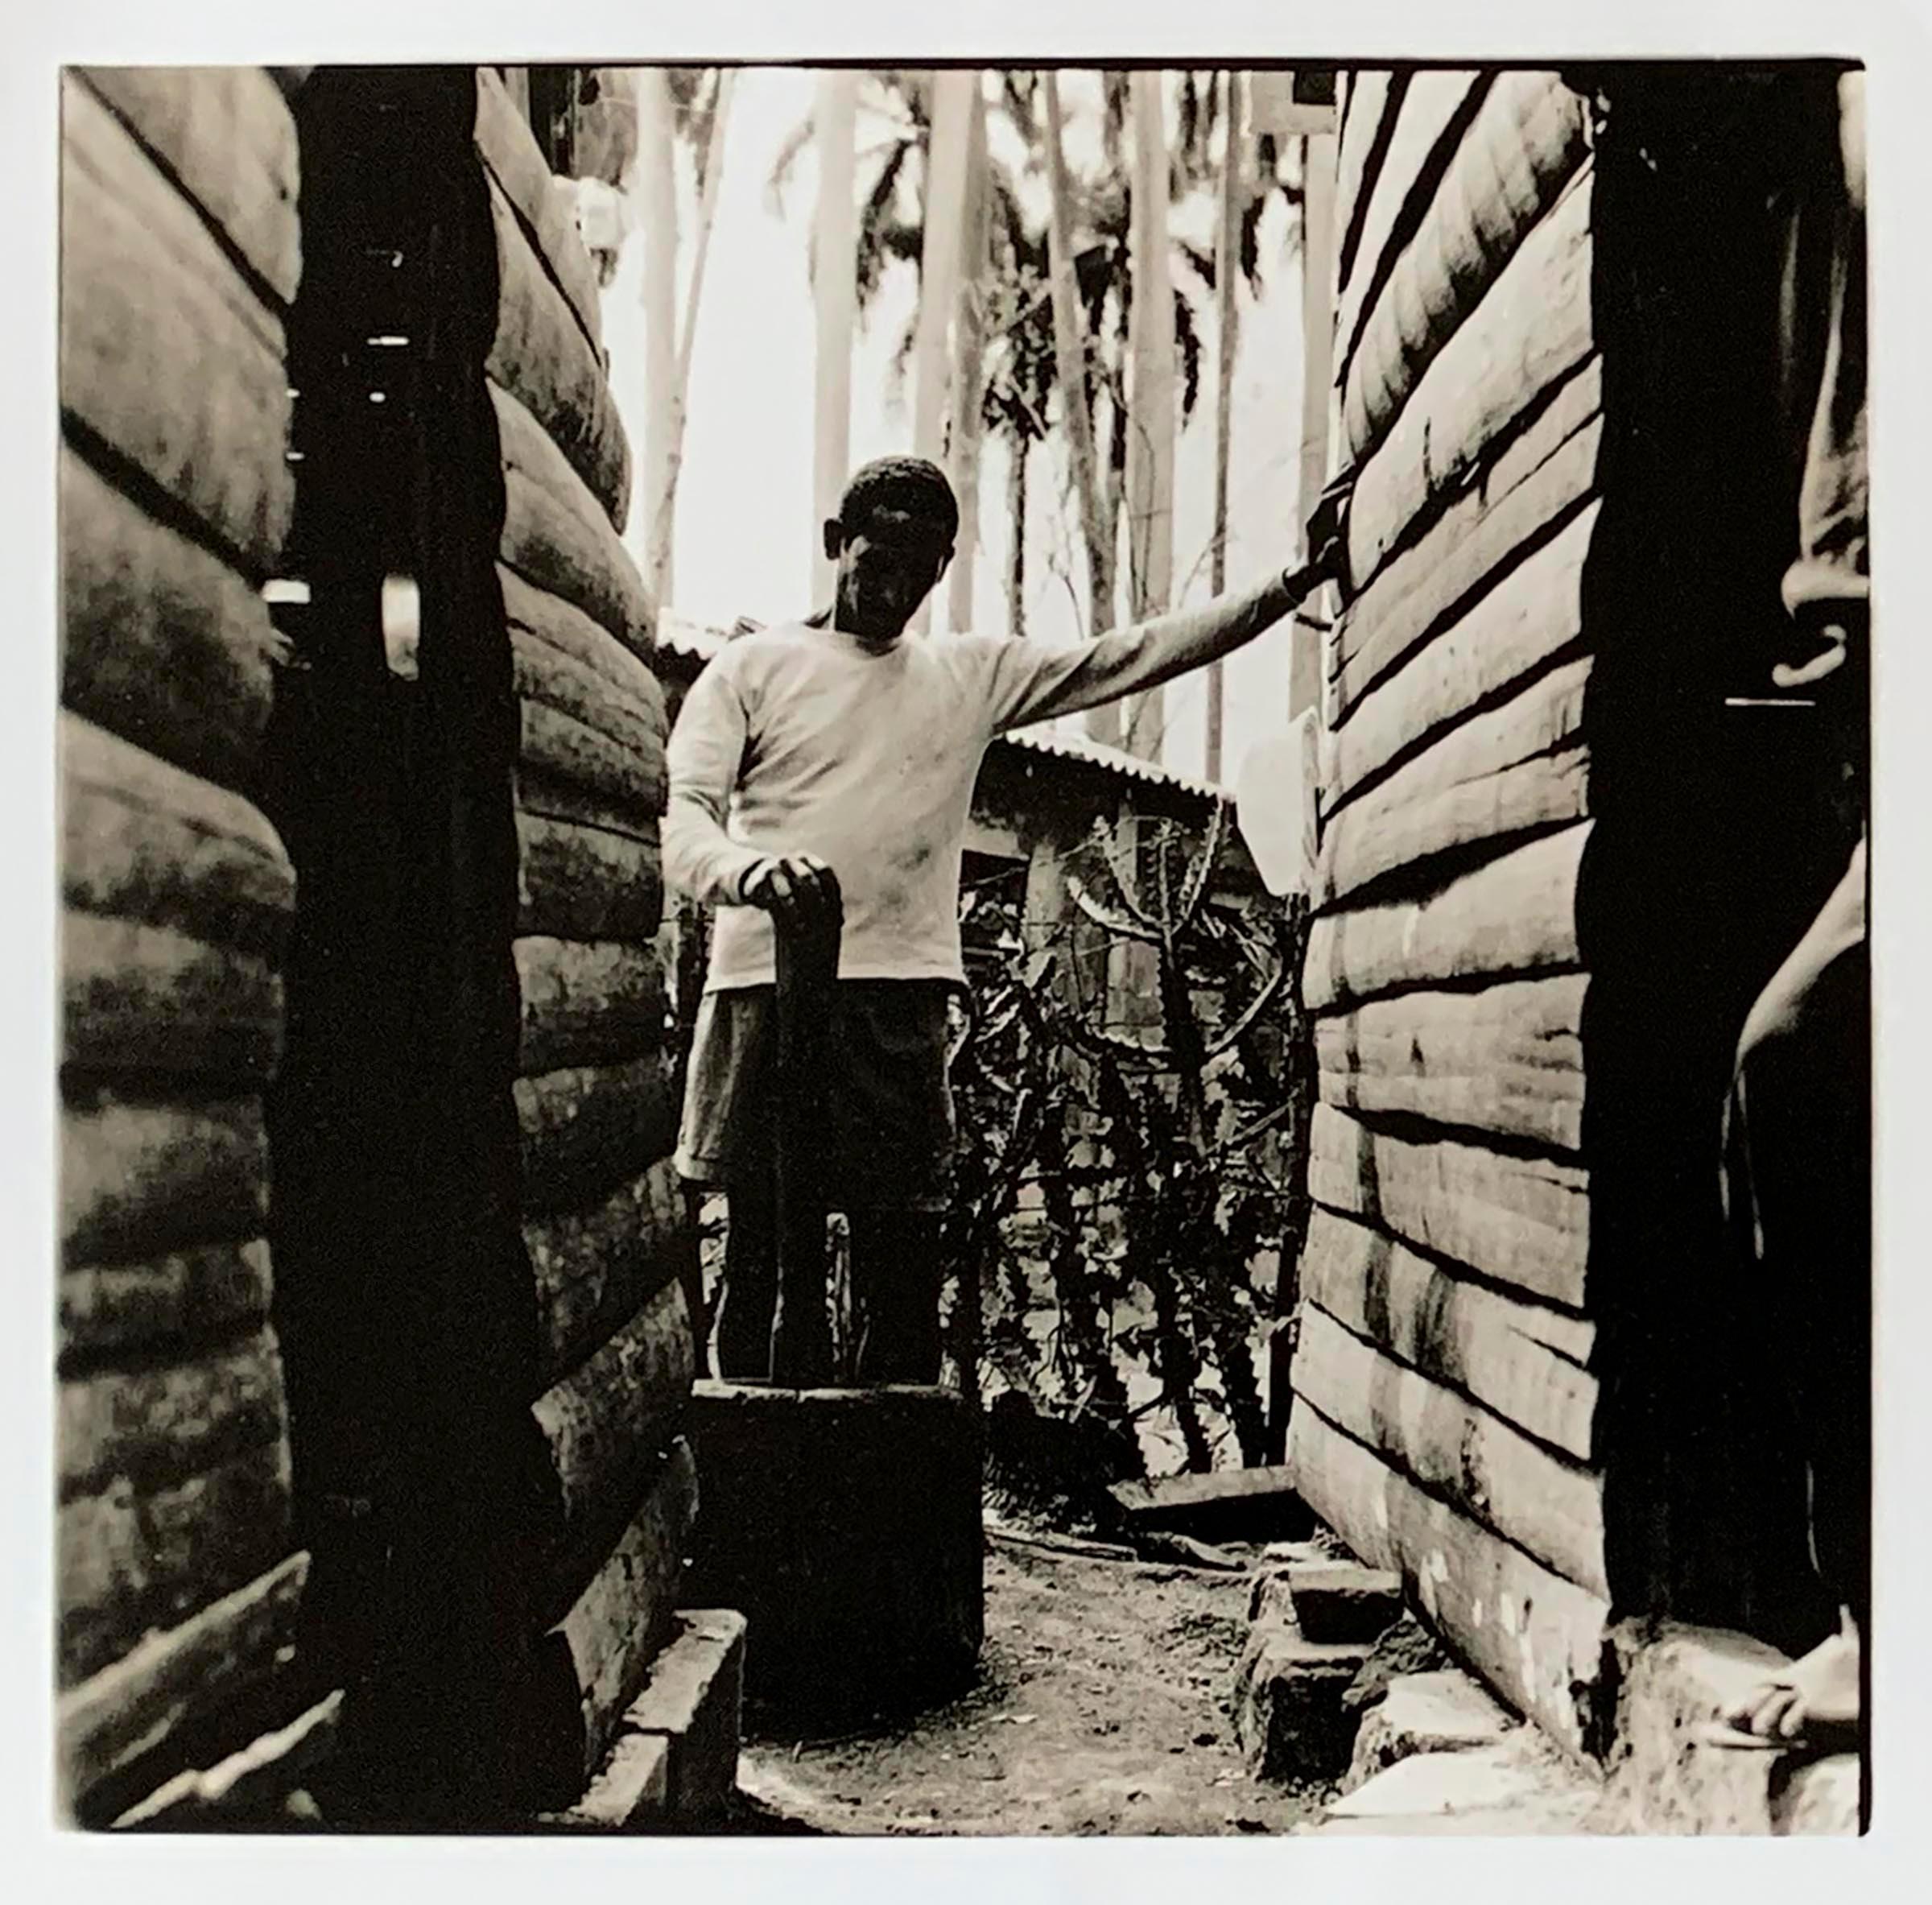 Grinding Coffee in Cuba, one of a kind gelatin silver lith print, figurative